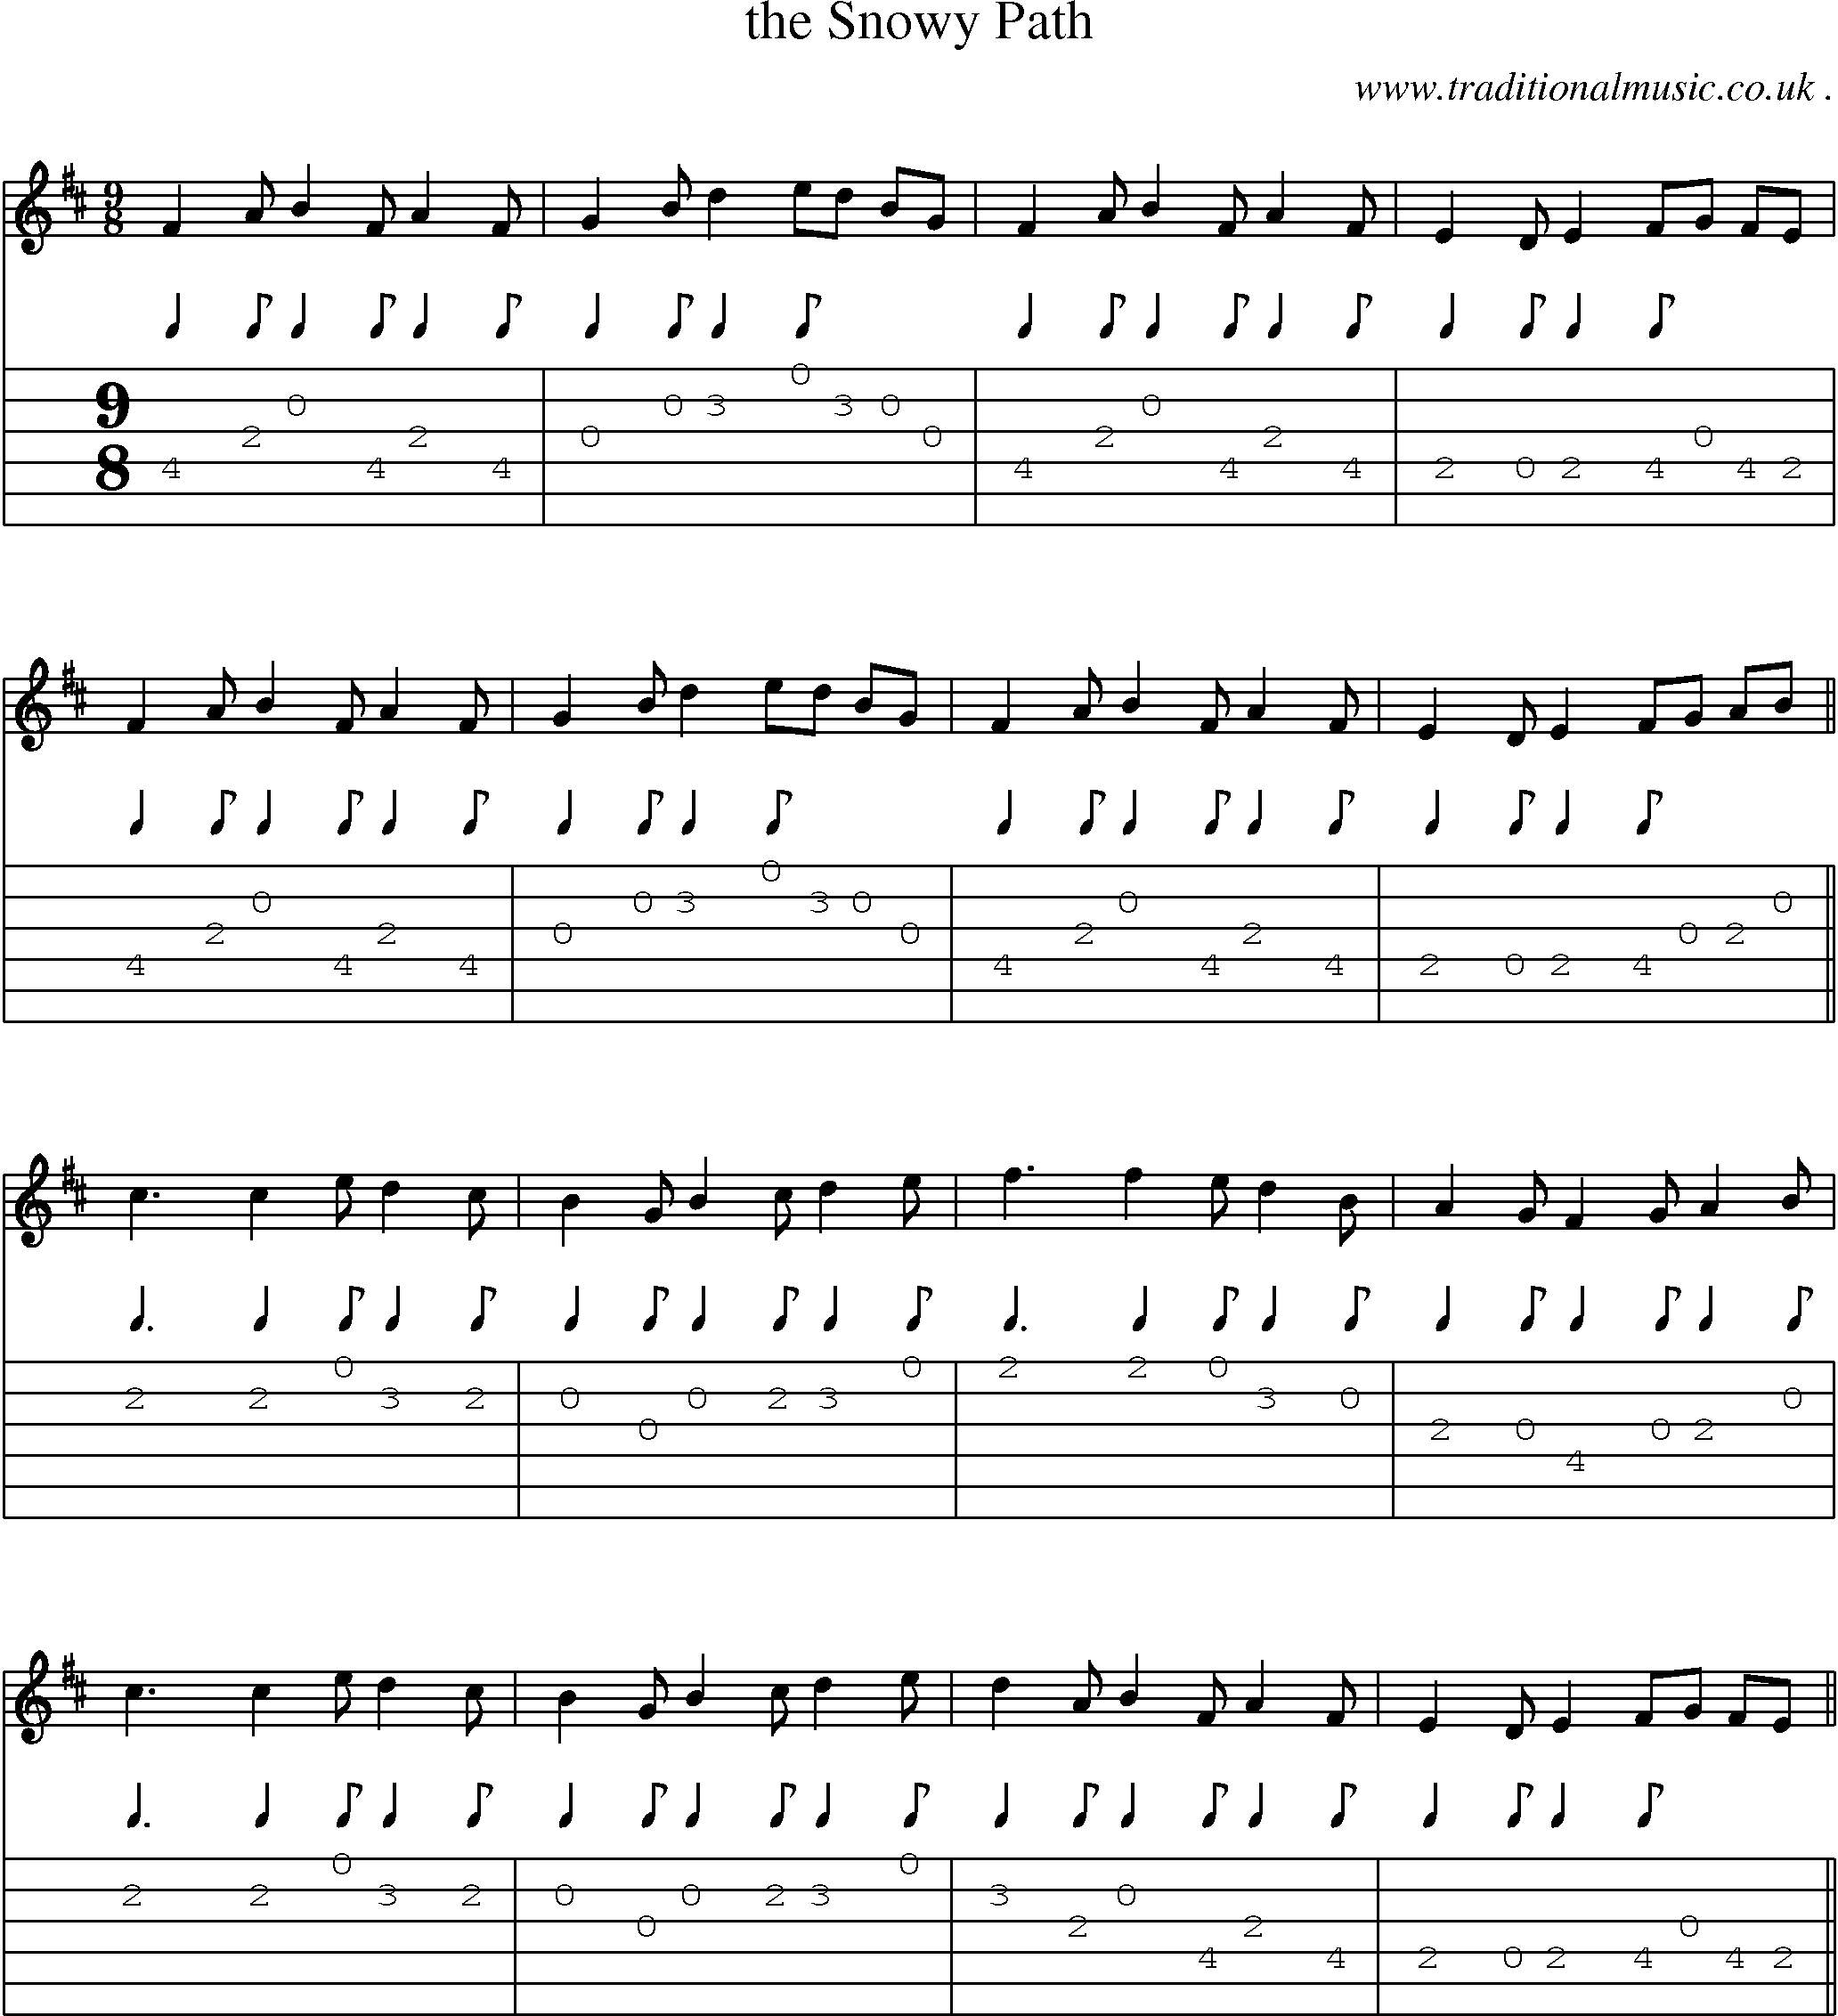 Sheet-Music and Guitar Tabs for The Snowy Path